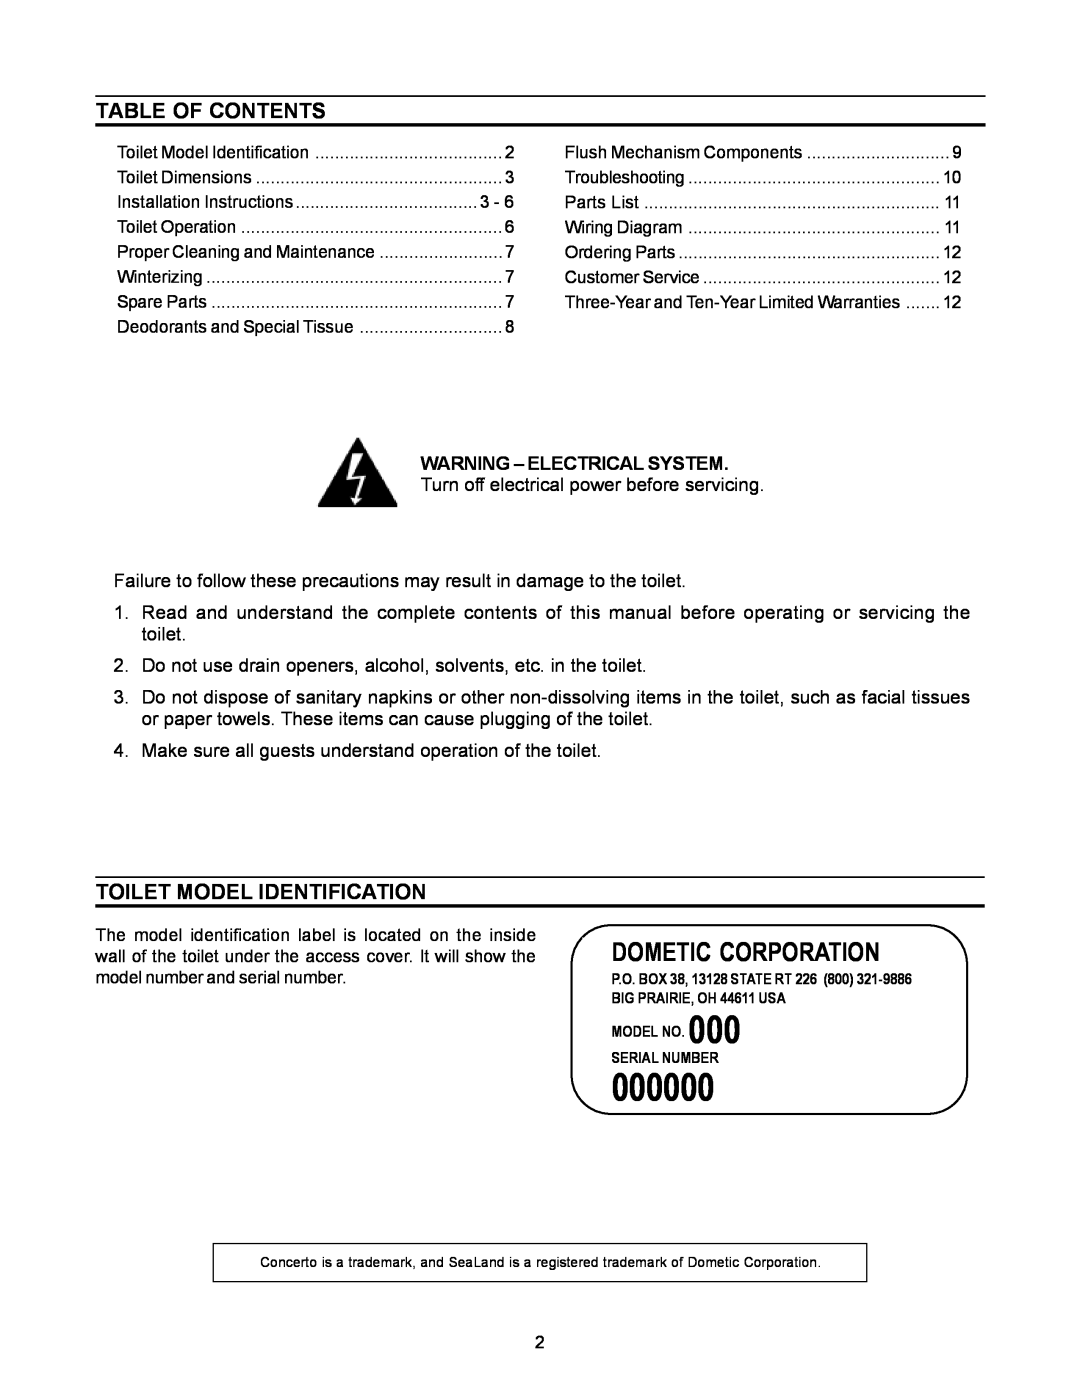 Dometic 3210 Table Of Contents, Toilet Model Identification, 000000, Dometic Corporation, Warning - Electrical System 